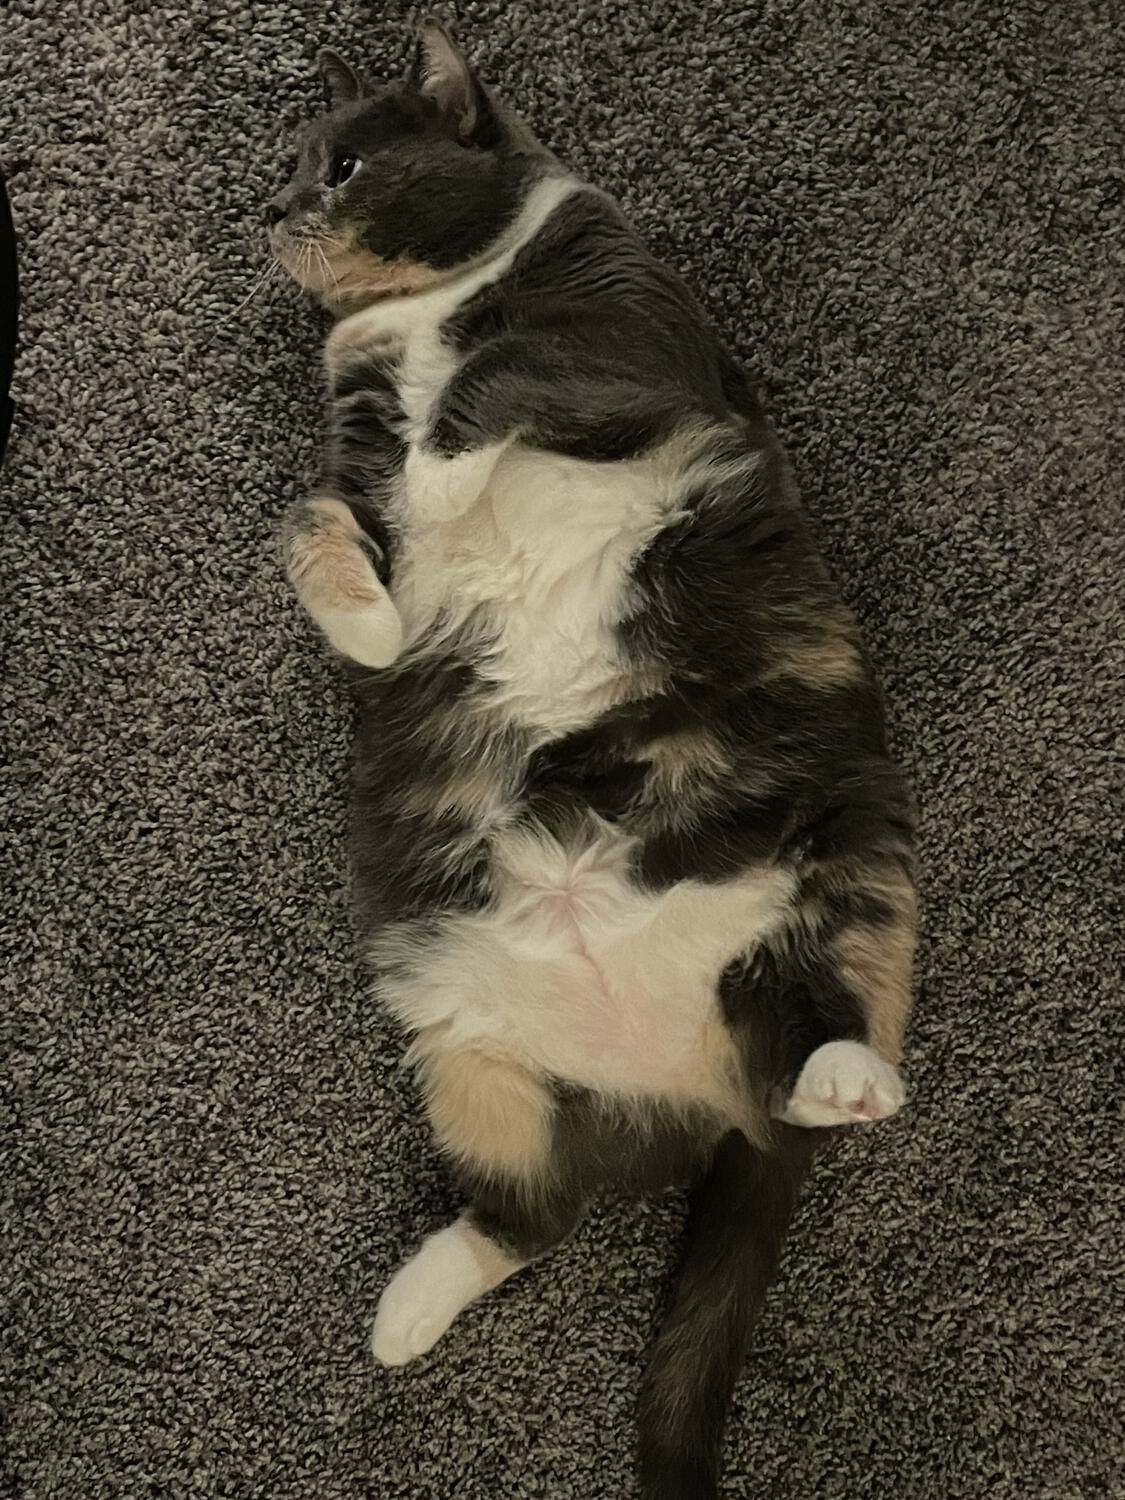 A chubby cat flopped on its back on the carpet